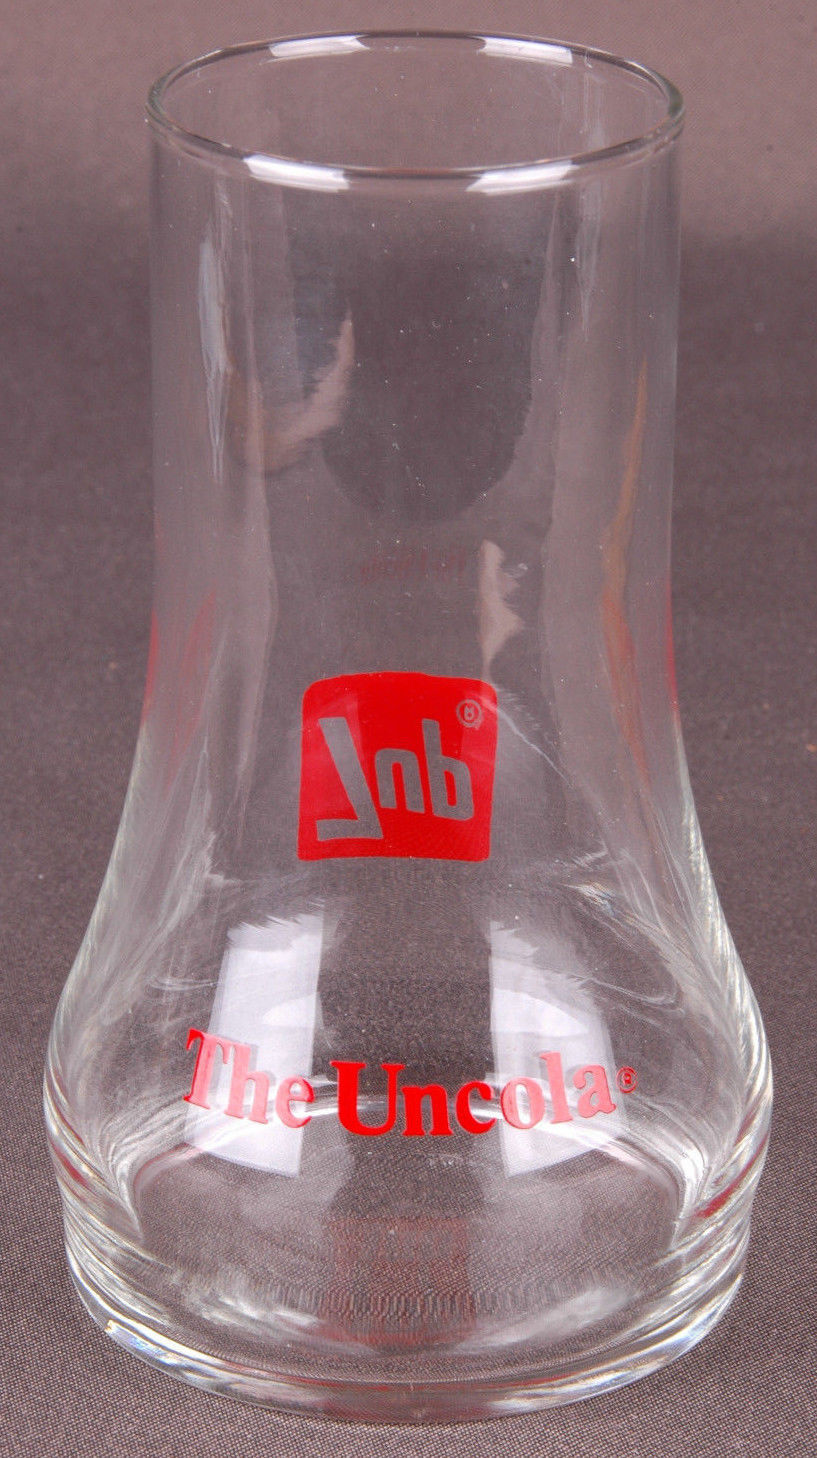  7UP The Uncola Glass upside down cup tumbler soda soft drink-Vtg - $9.49